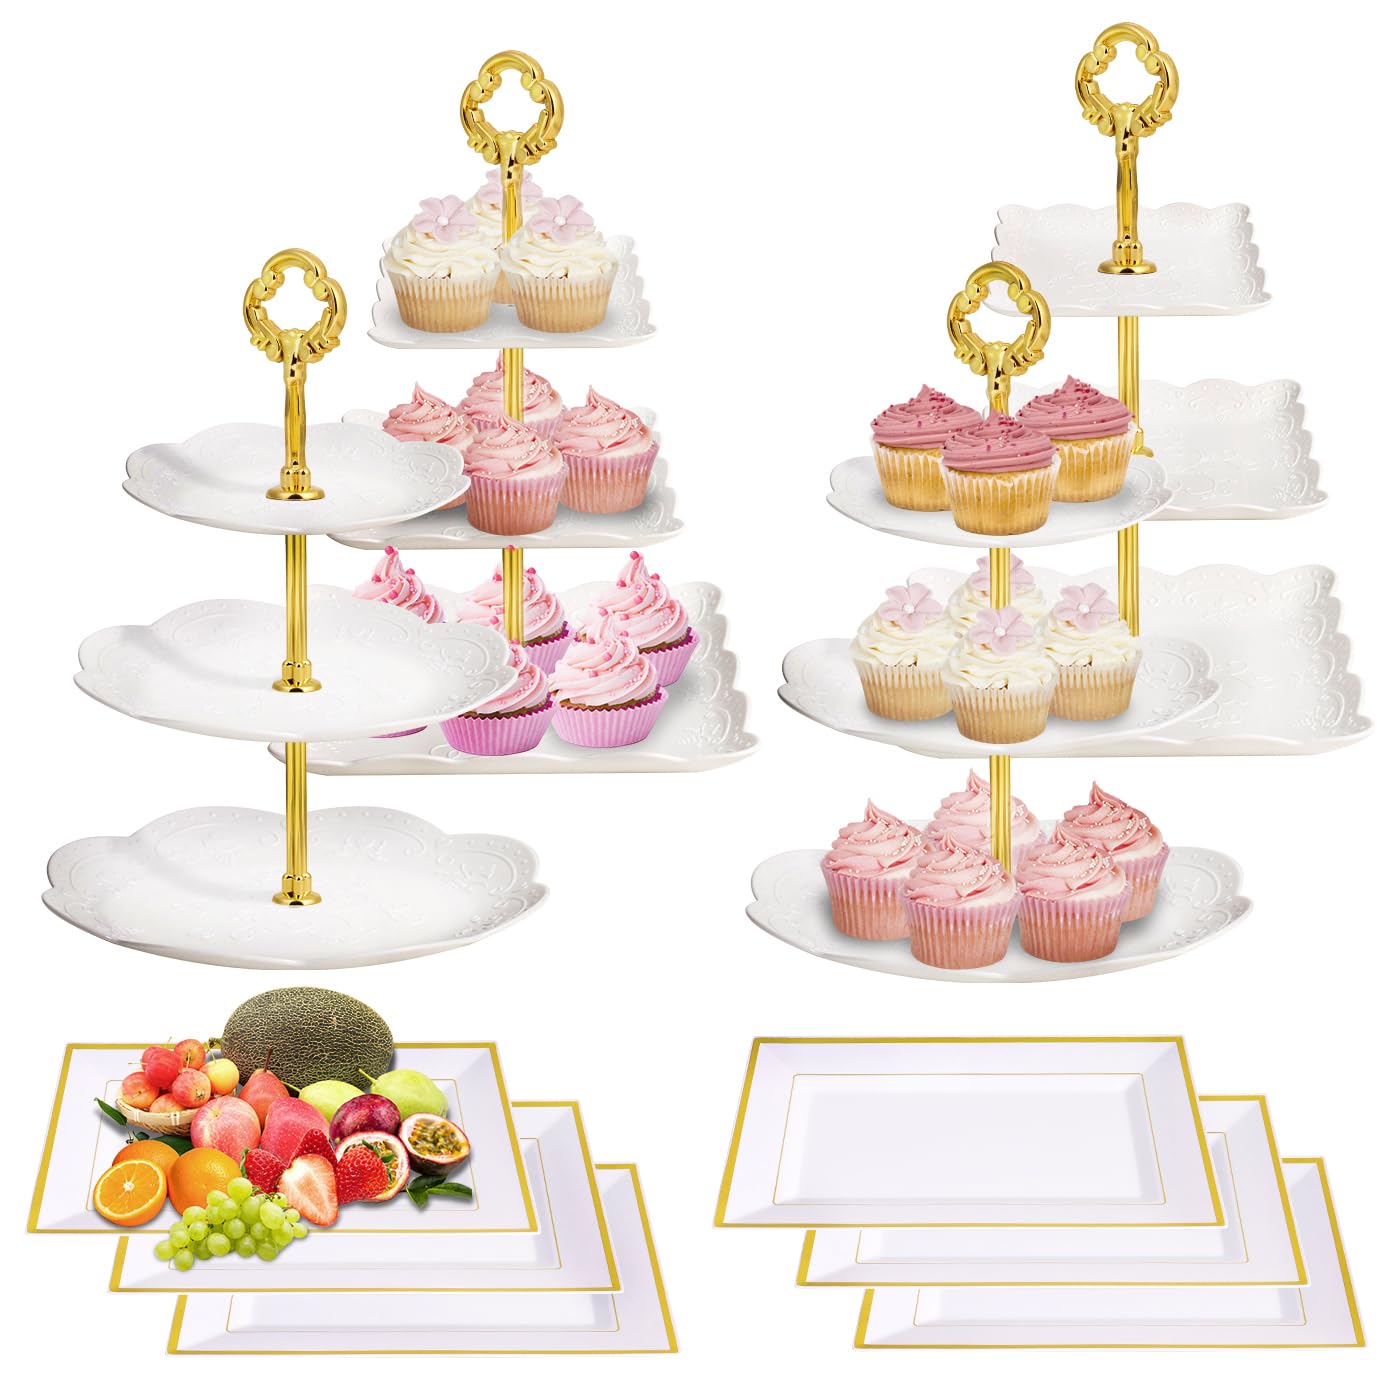 mwellewm 10 Pcs Dessert Table Stand Set 4 Pcs 3-Tier Plastic Cupcake Stands Gold Cake Stand Cookie Tray Rack Serving Tray Cake Display Tower and 6 Pcs Dessert Trays for Wedding Baby Shower Tea Party